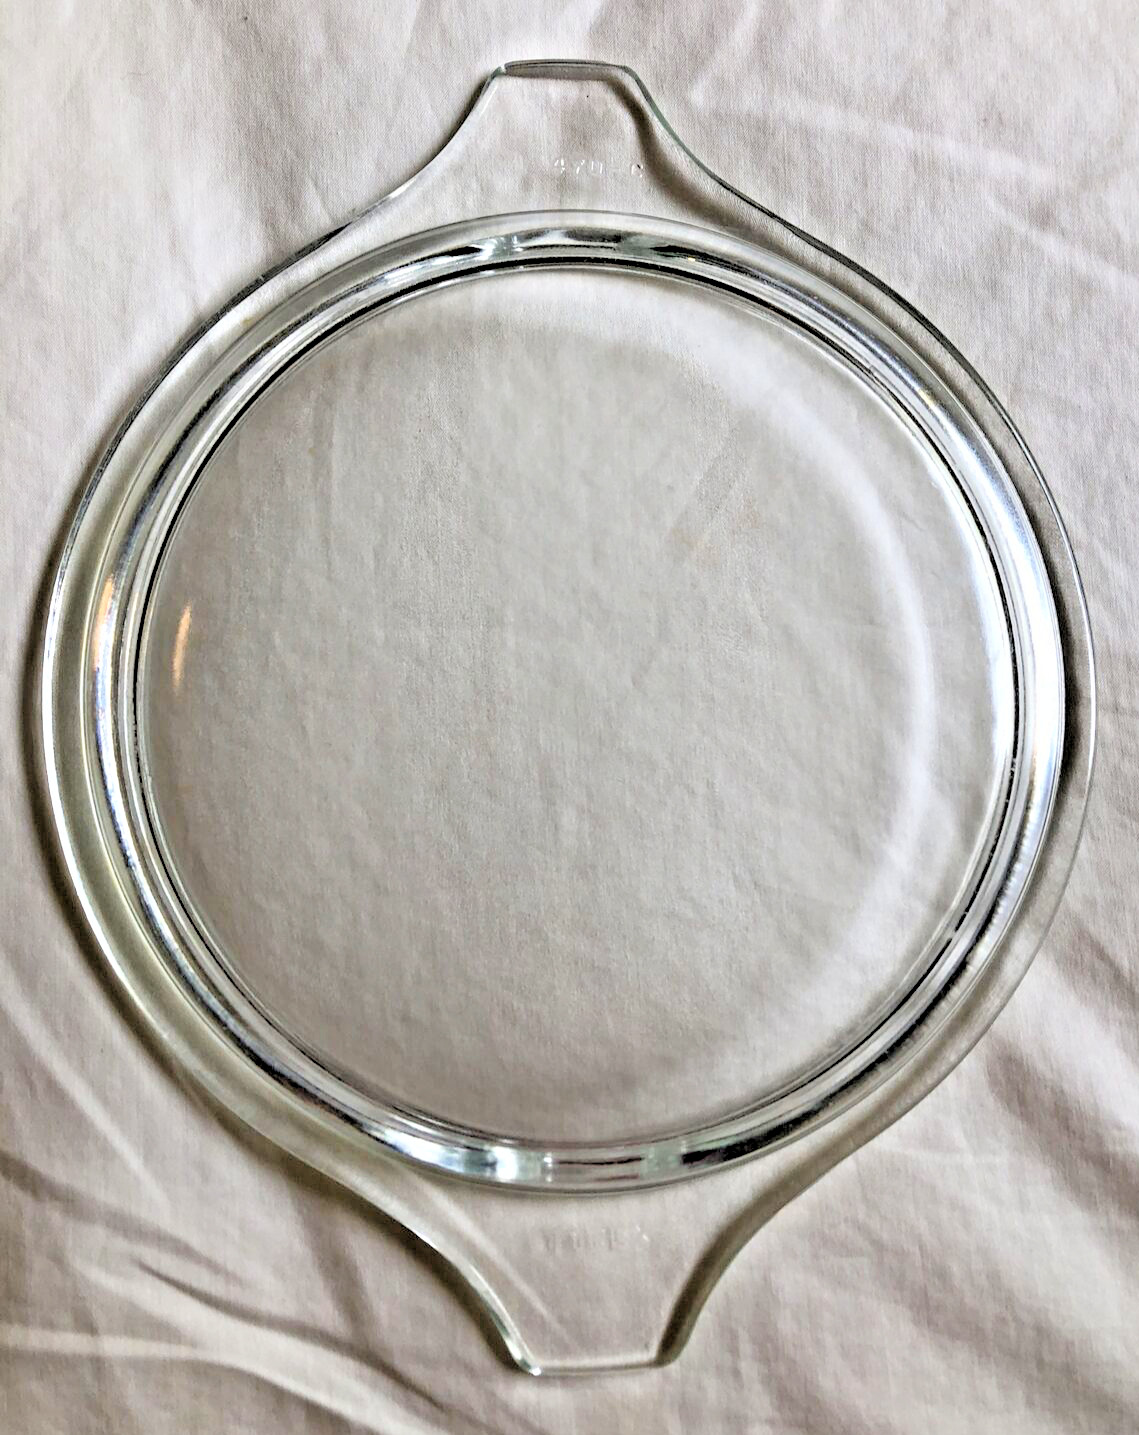 Vintage Pyrex Replacement Glass Lid 21-470-C Lid Only Clear Casserole